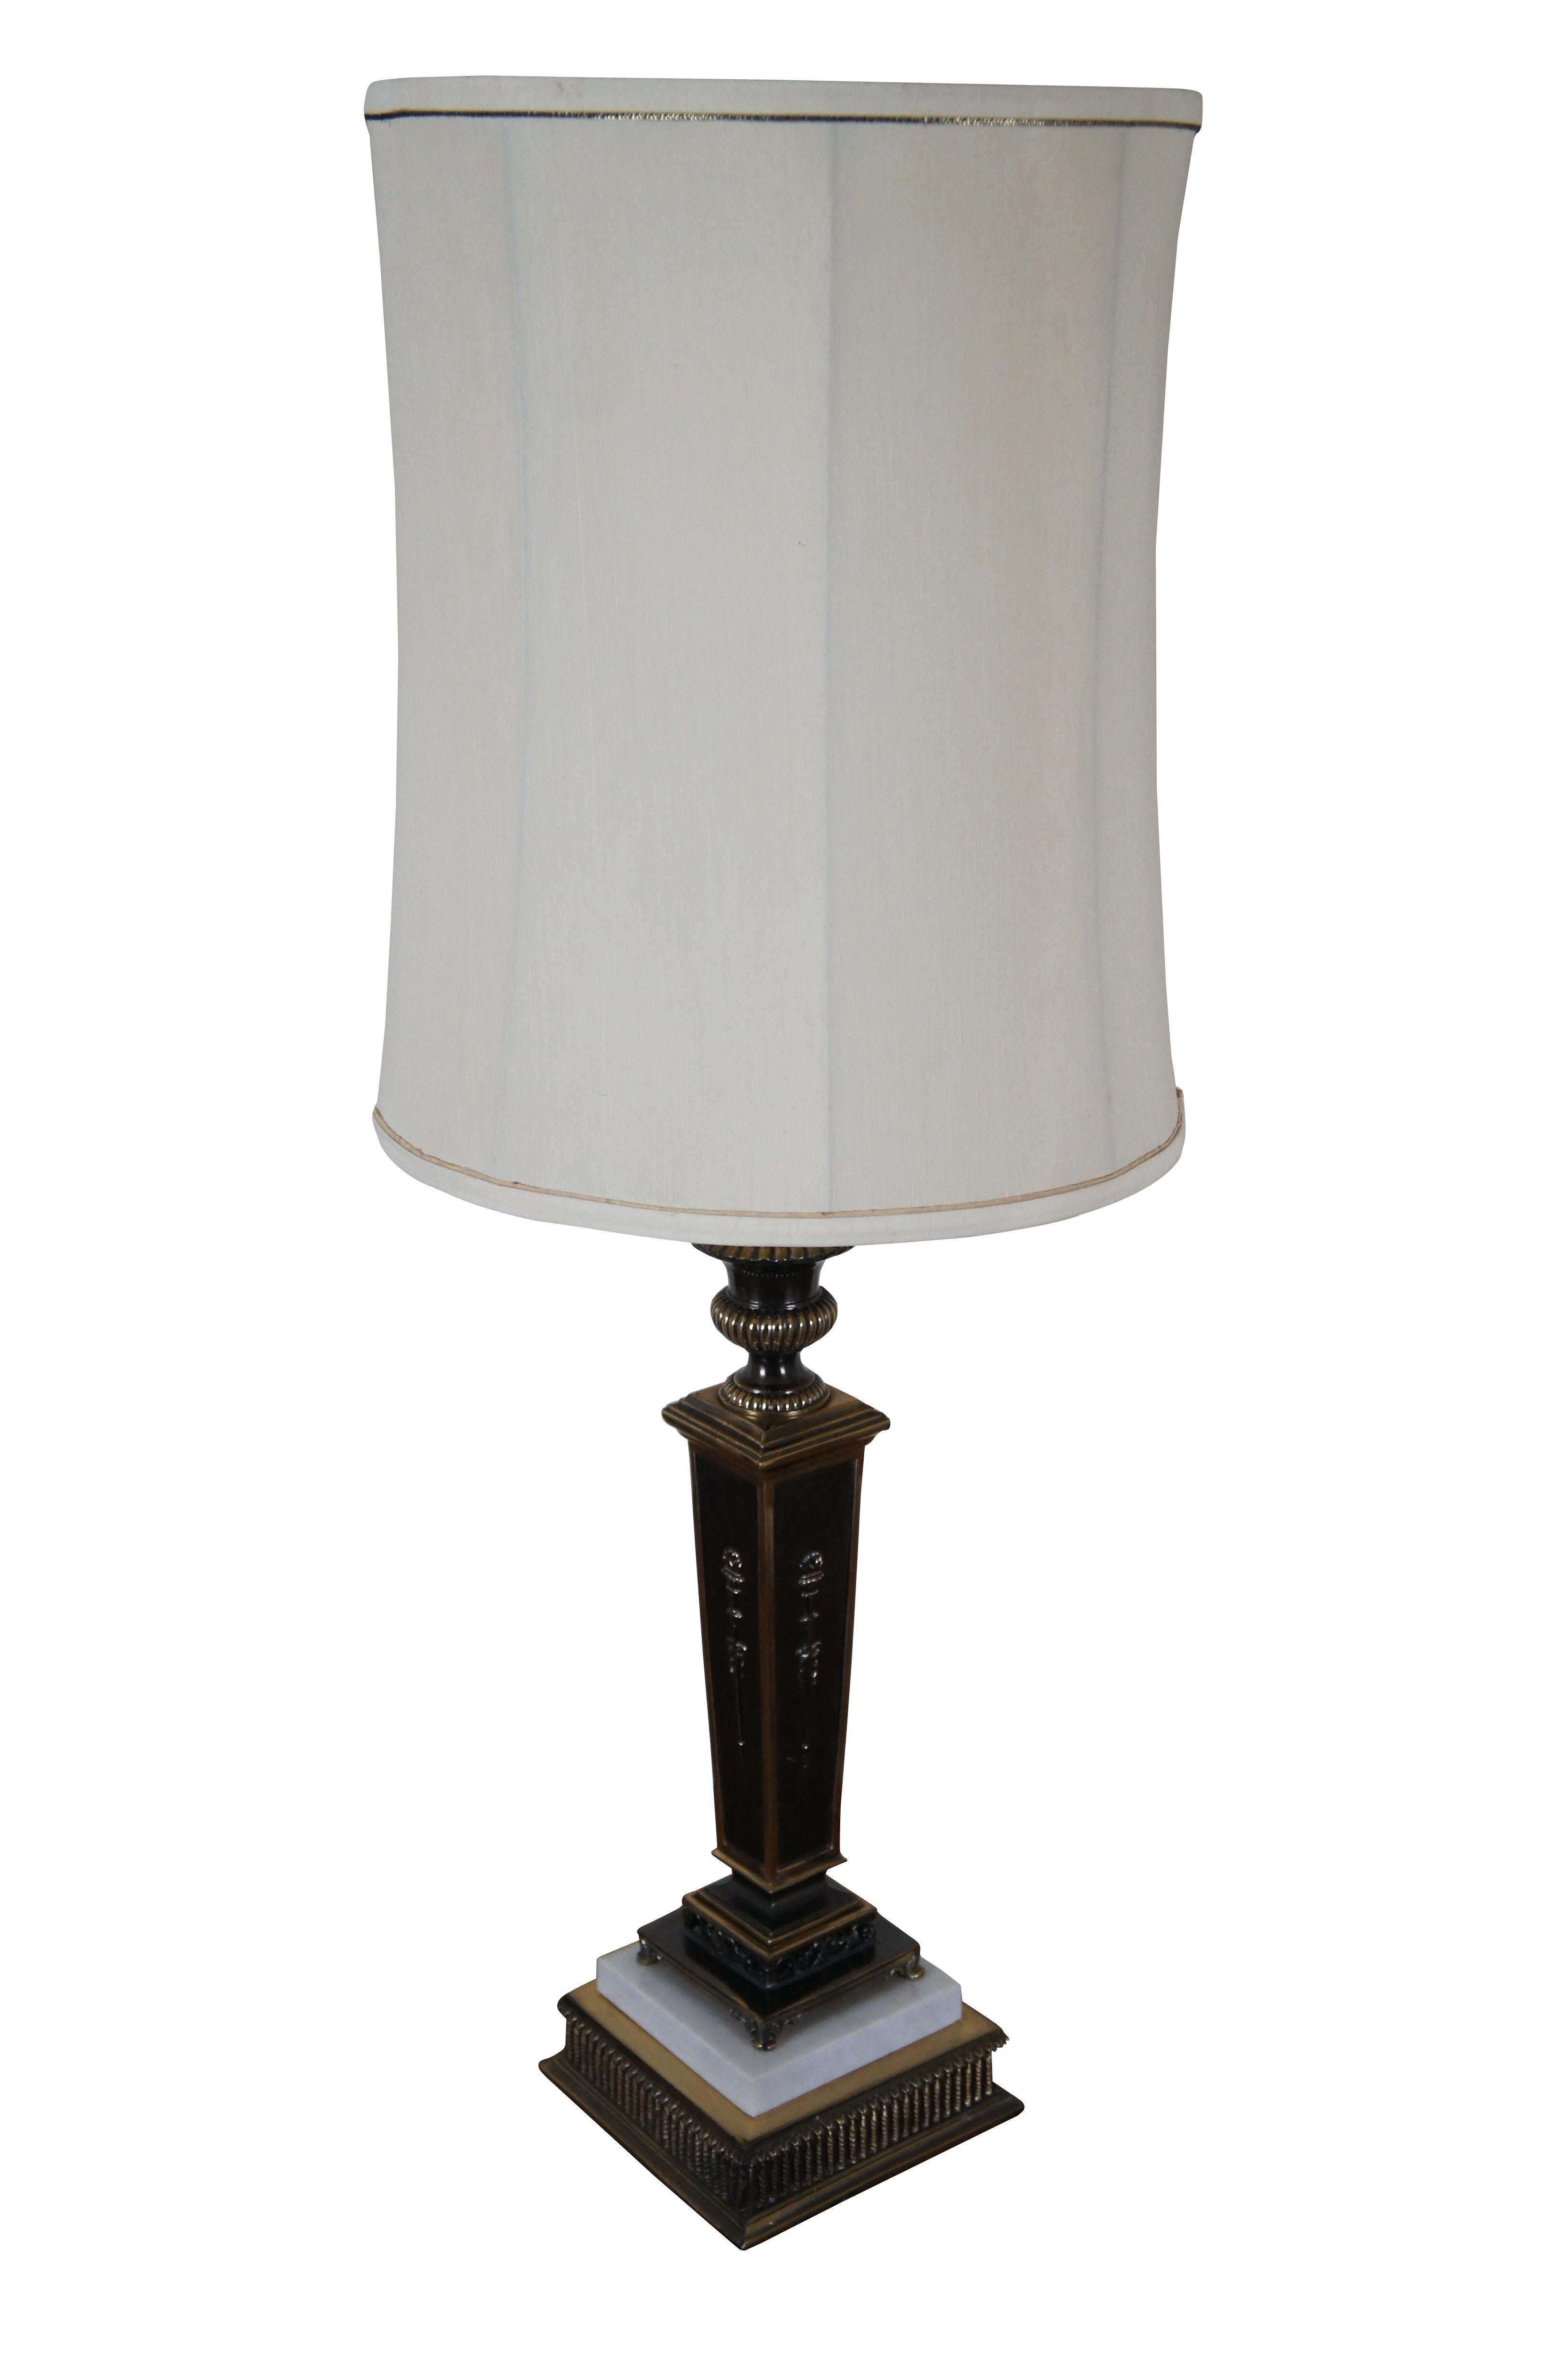 Vintage Empire style torchiere / square column / candlestick shaped table lamp, crafted of brass with dark accents and white marble on the base. Includes cap shaped finial and cylindrical white cloth shade with narrow trim.

Dimensions:
6.75